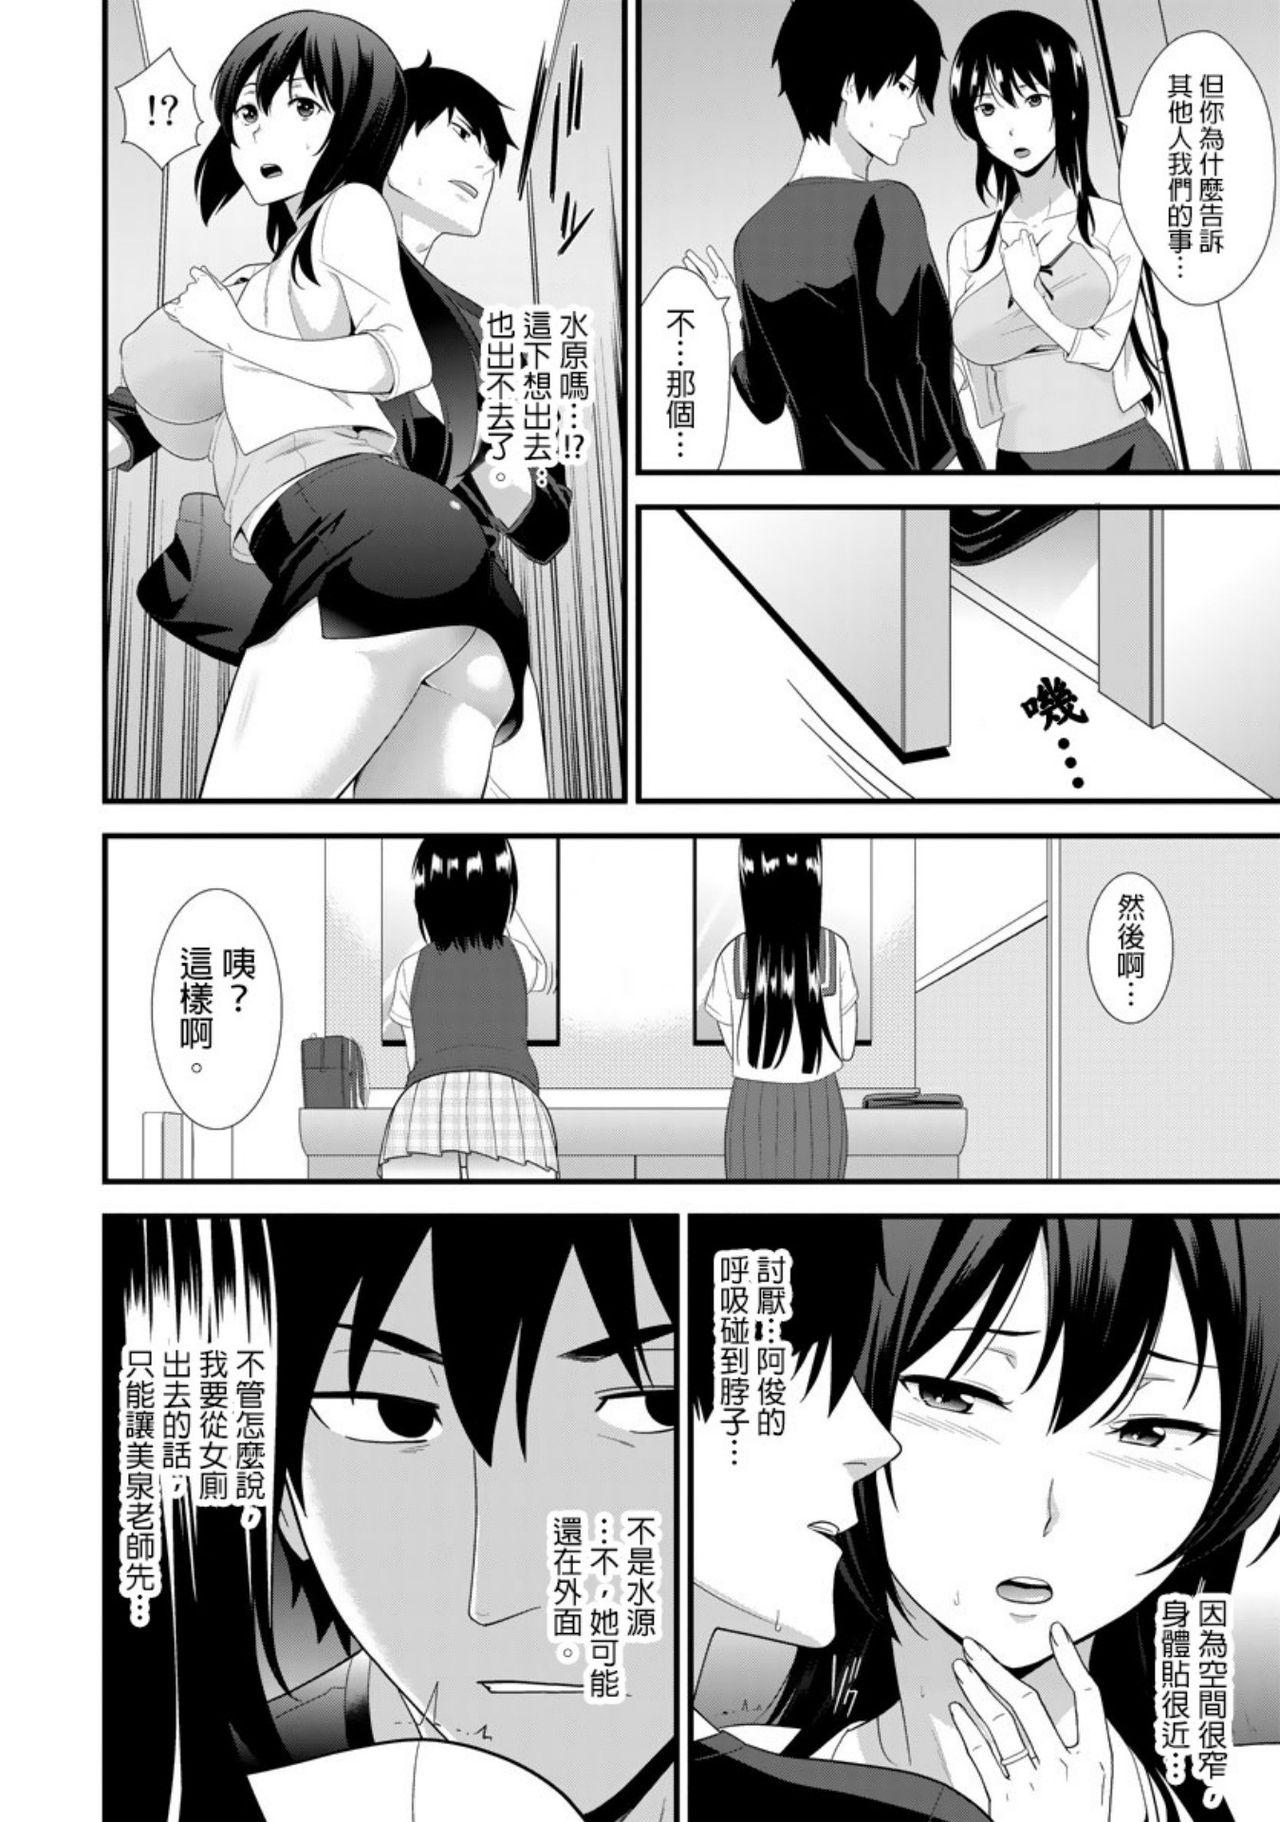 Smooth 教え子に襲ワレル人妻は抵抗できなくて Ch.3 Hotel - Page 13